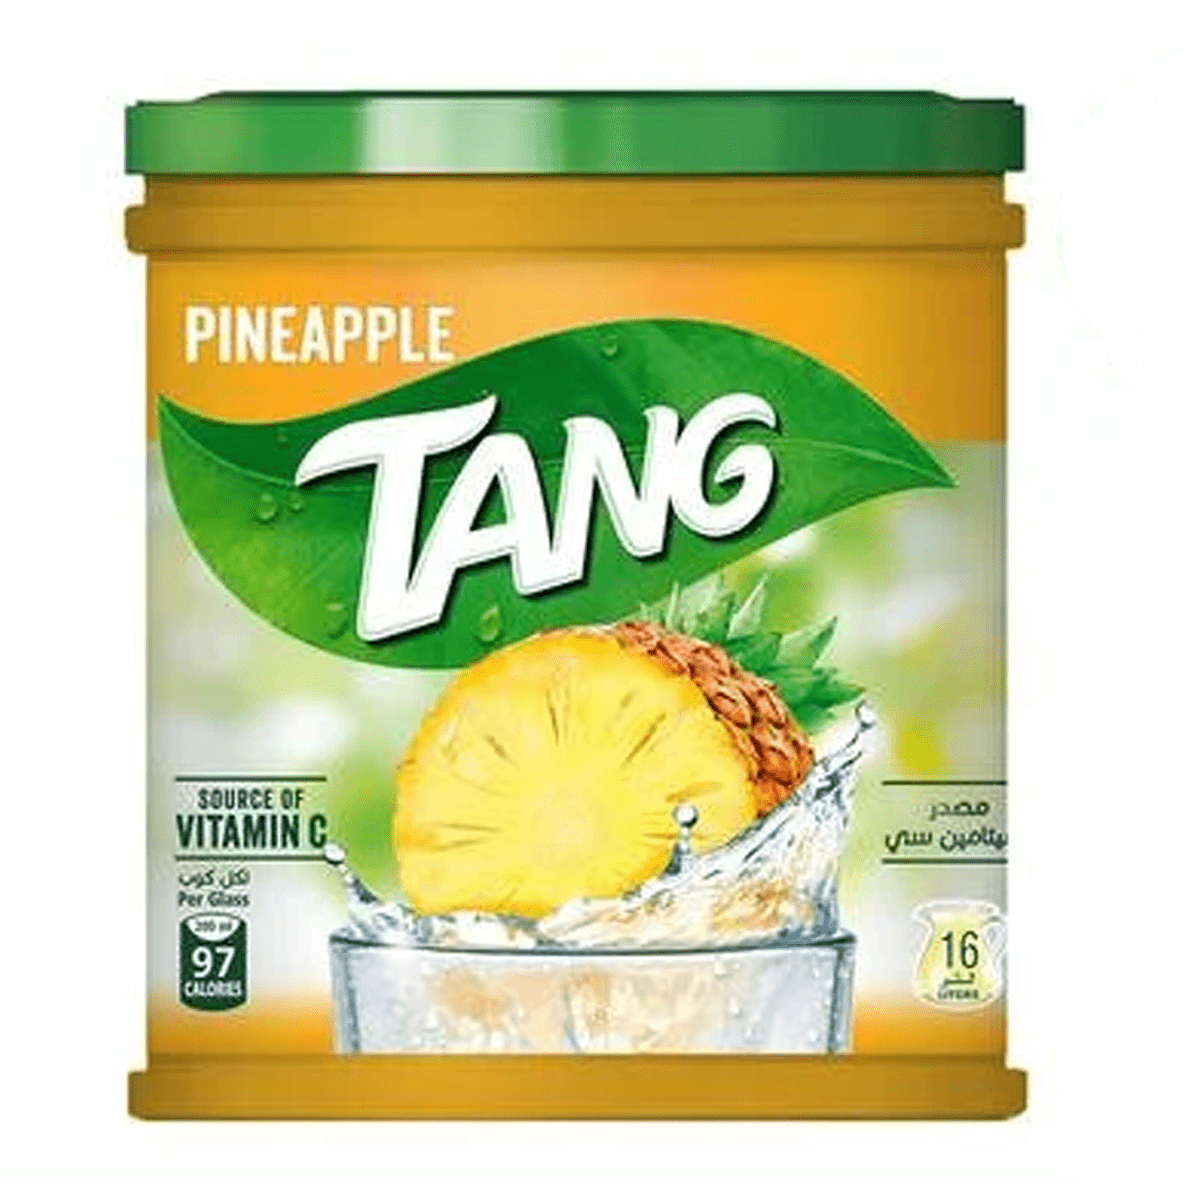 Tang Instant Drink Pineapple 2kg